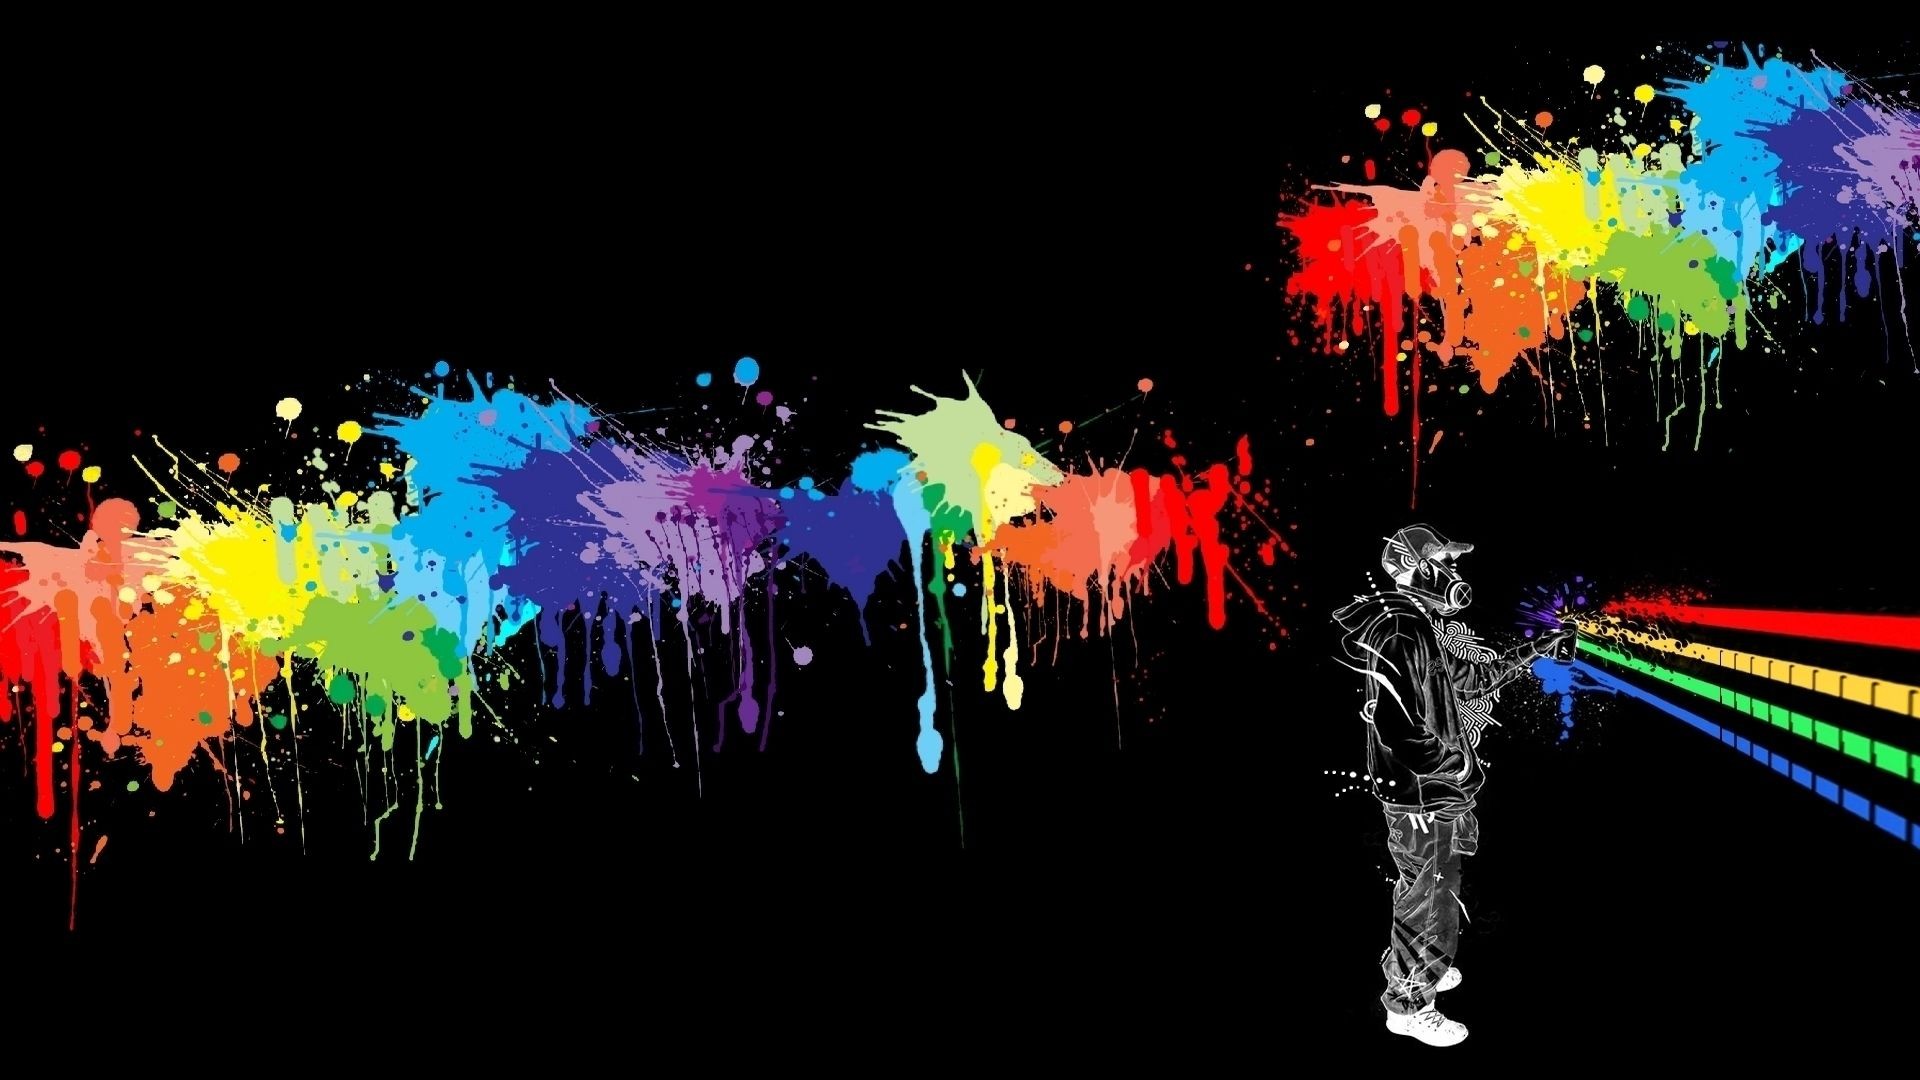 Graffiti Tag Background Wallpaper HD with image resolution 1920x1080 pixel. You can make this wallpaper for your Desktop Computer Backgrounds, Mac Wallpapers, Android Lock screen or iPhone Screensavers